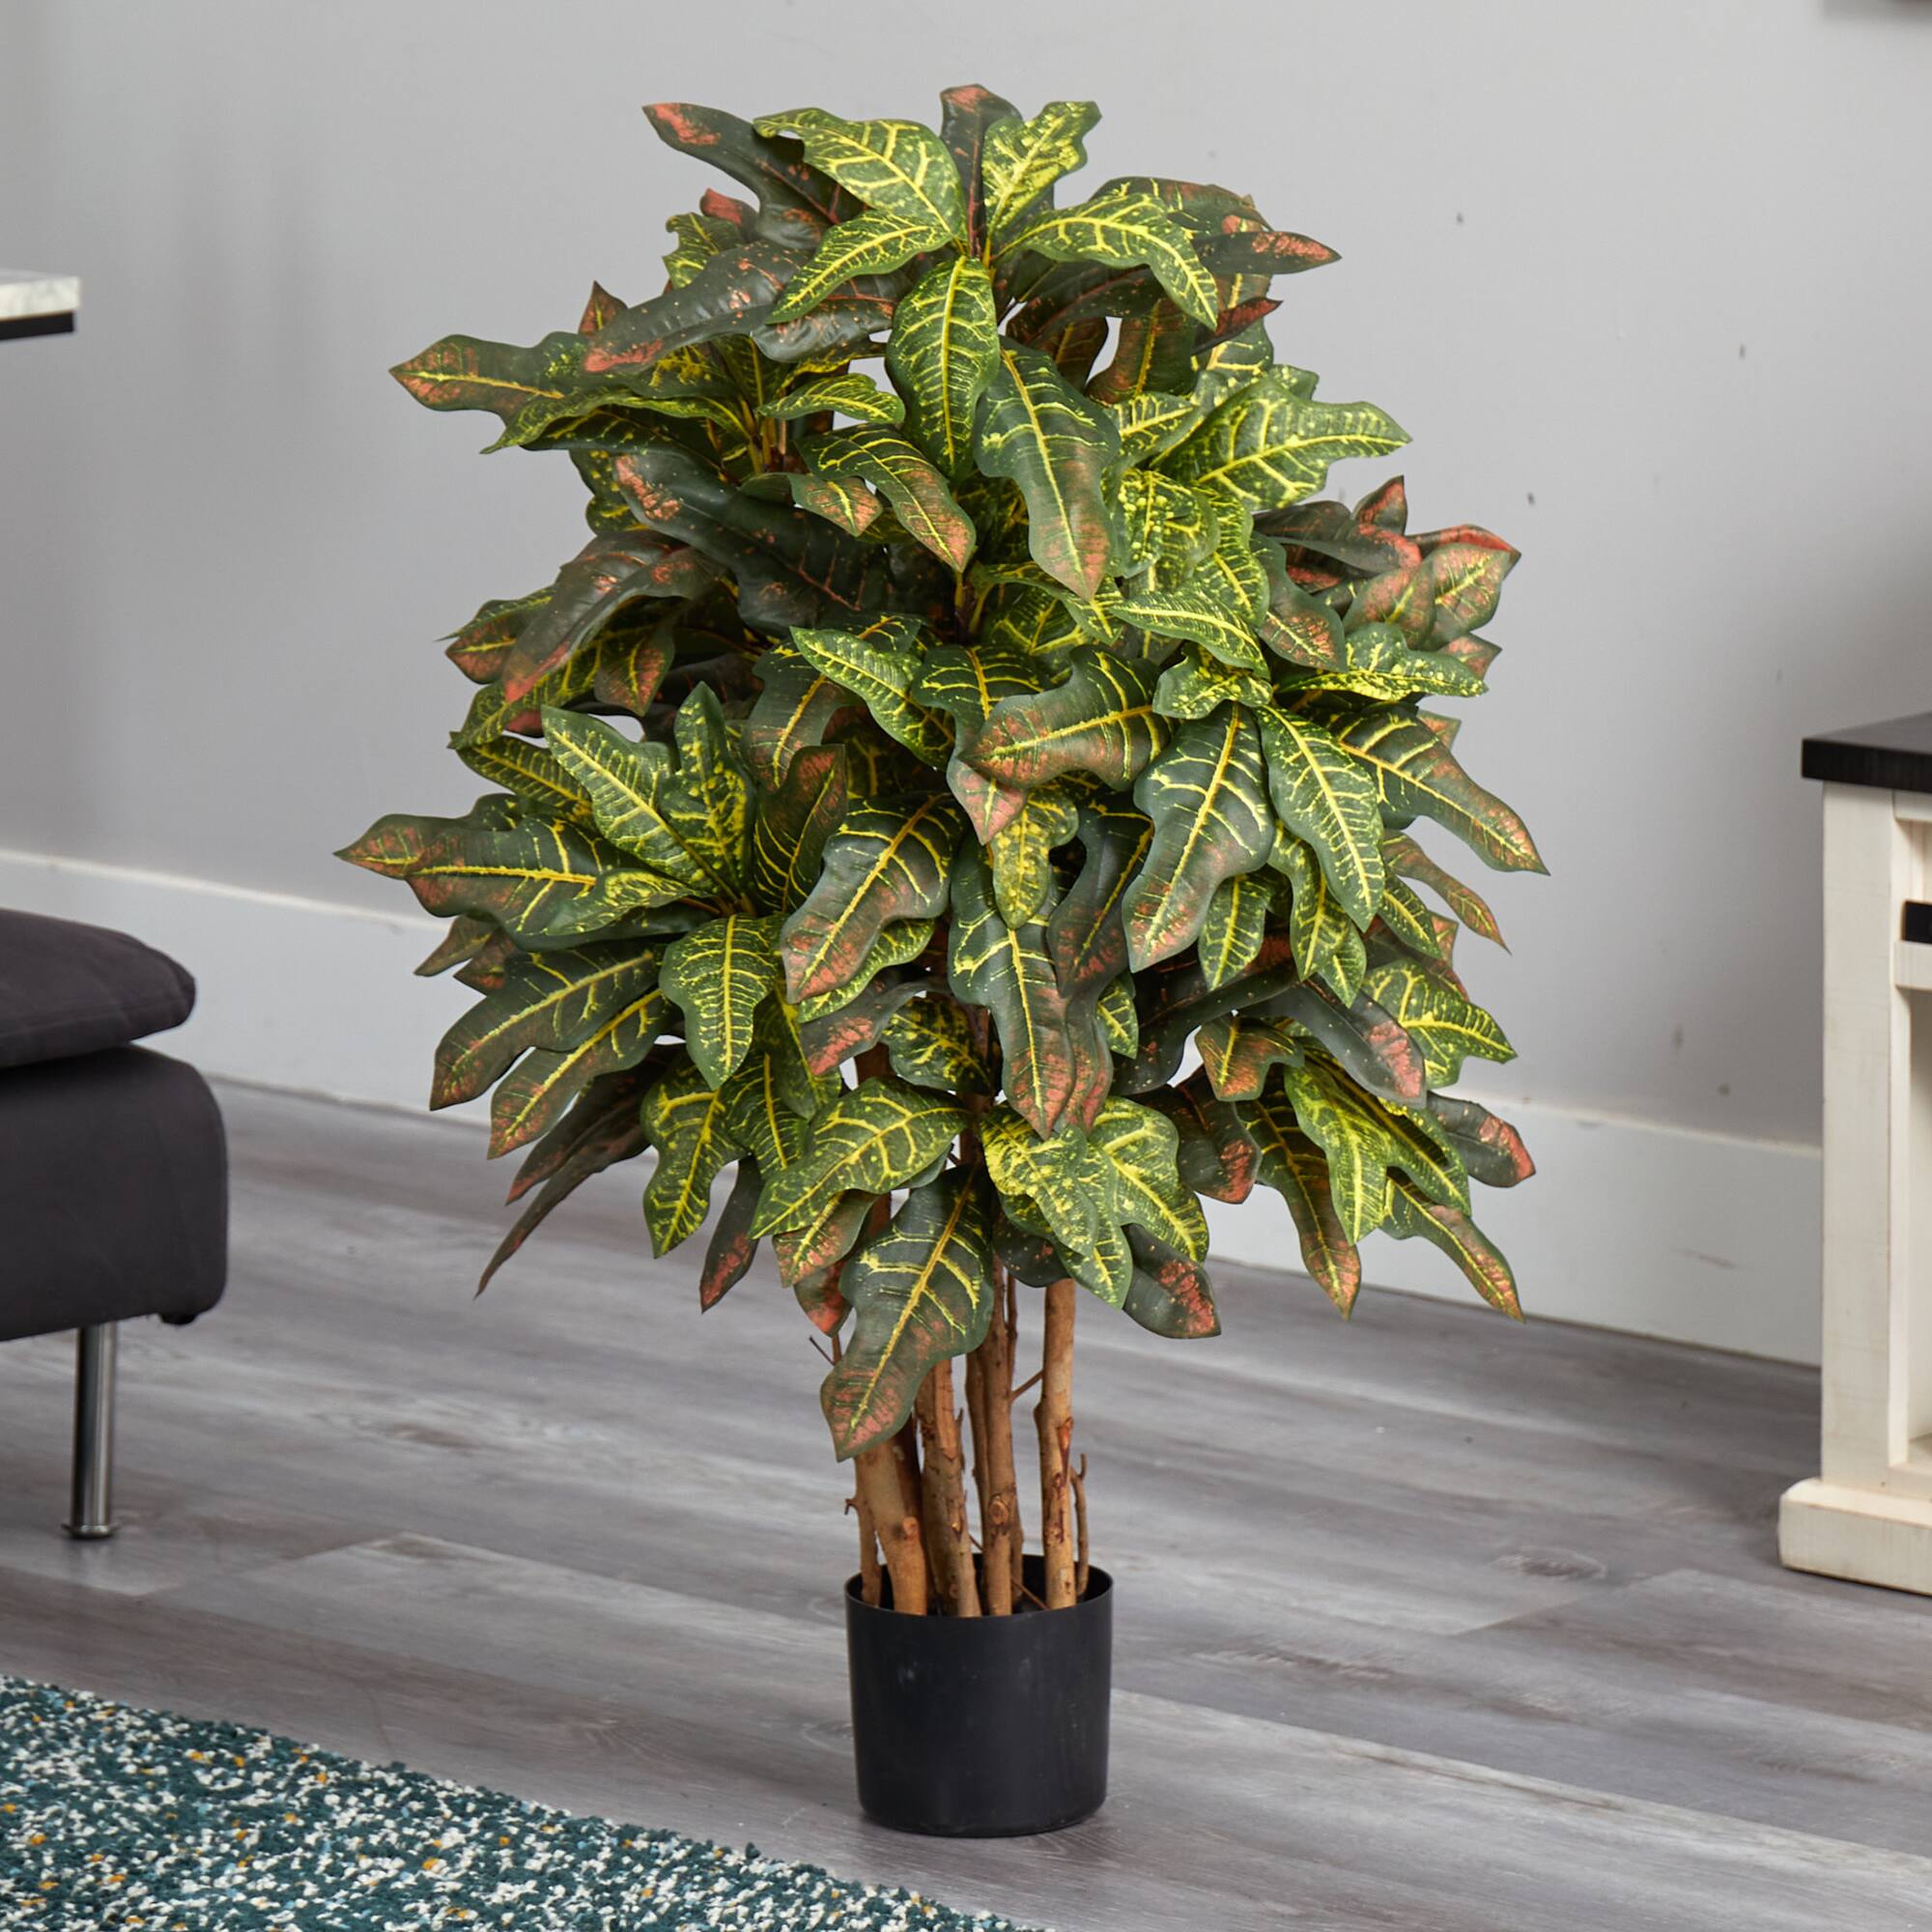 3ft. Potted Croton Tree